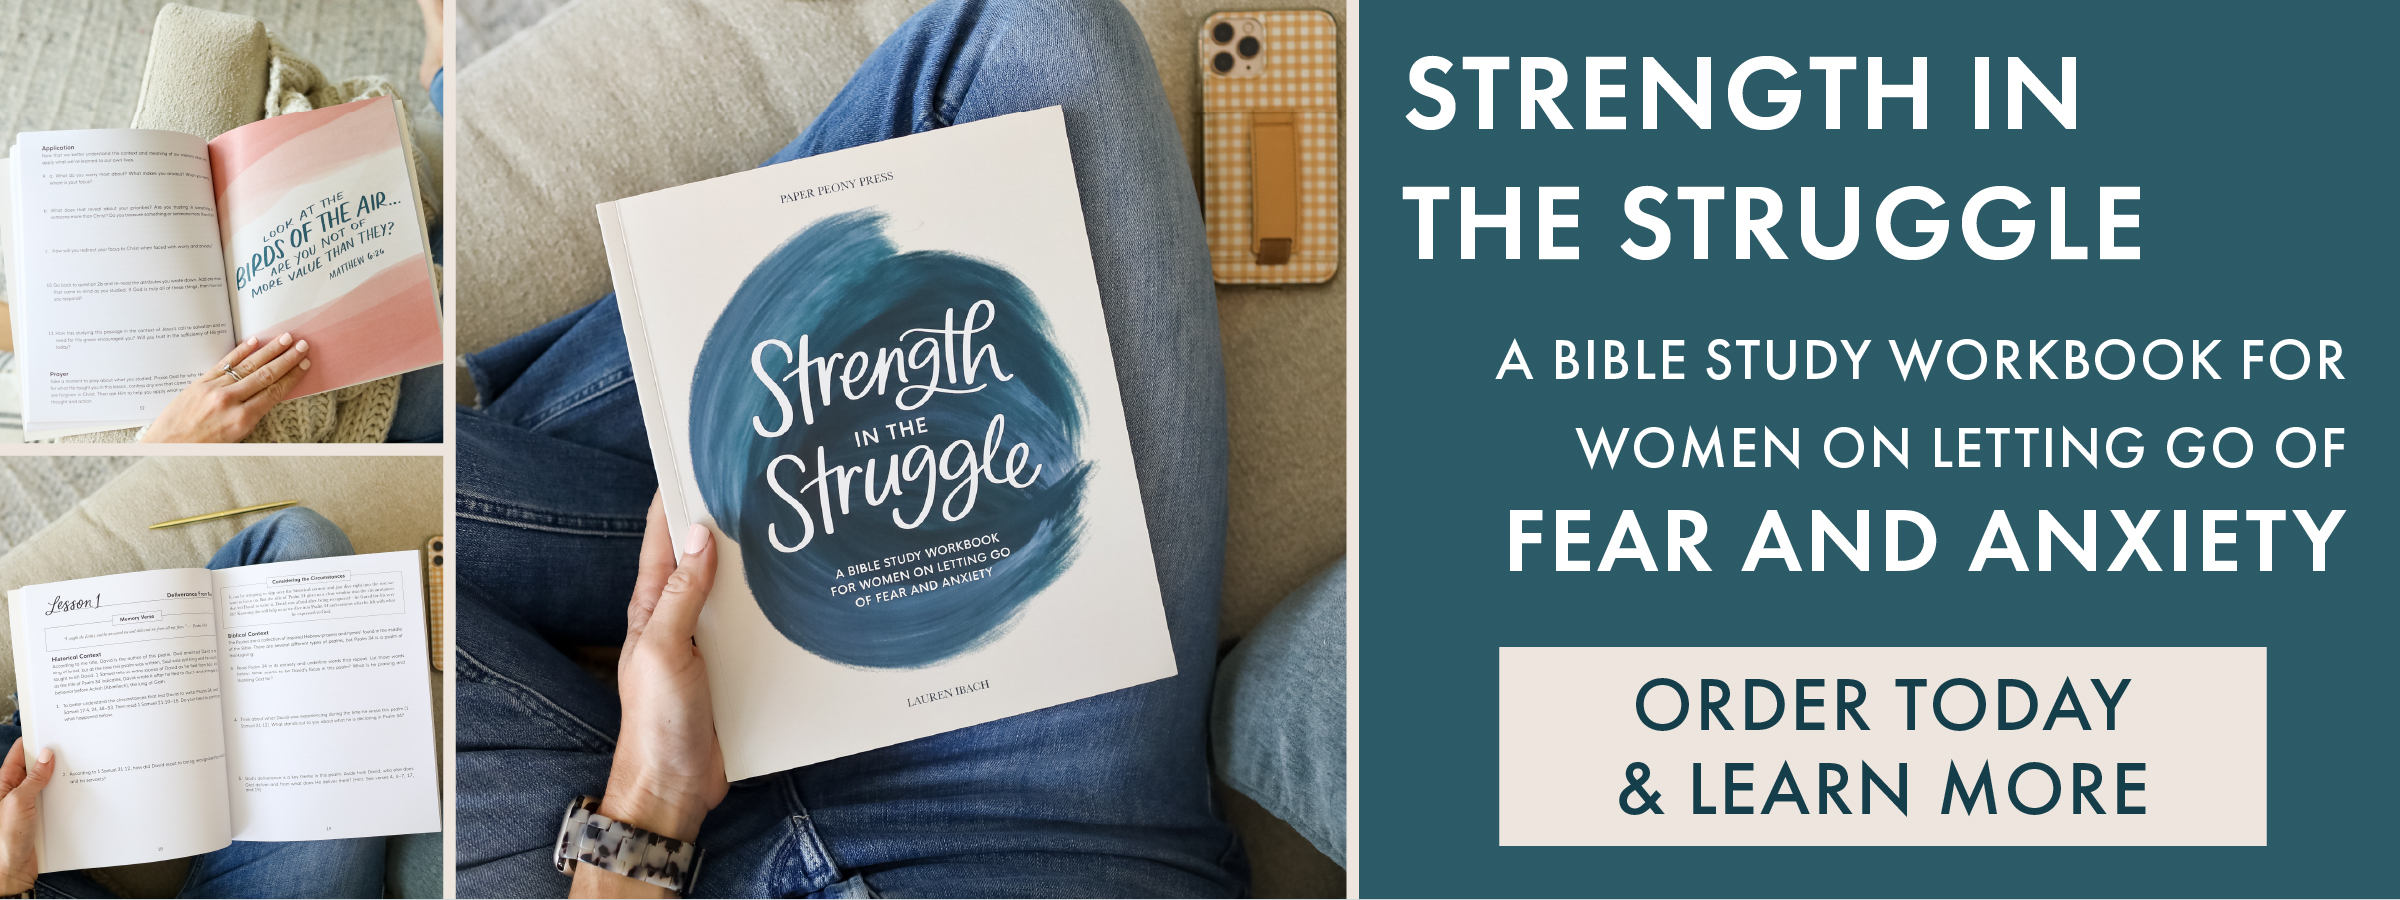 Strength in the Struggle Banner Ad